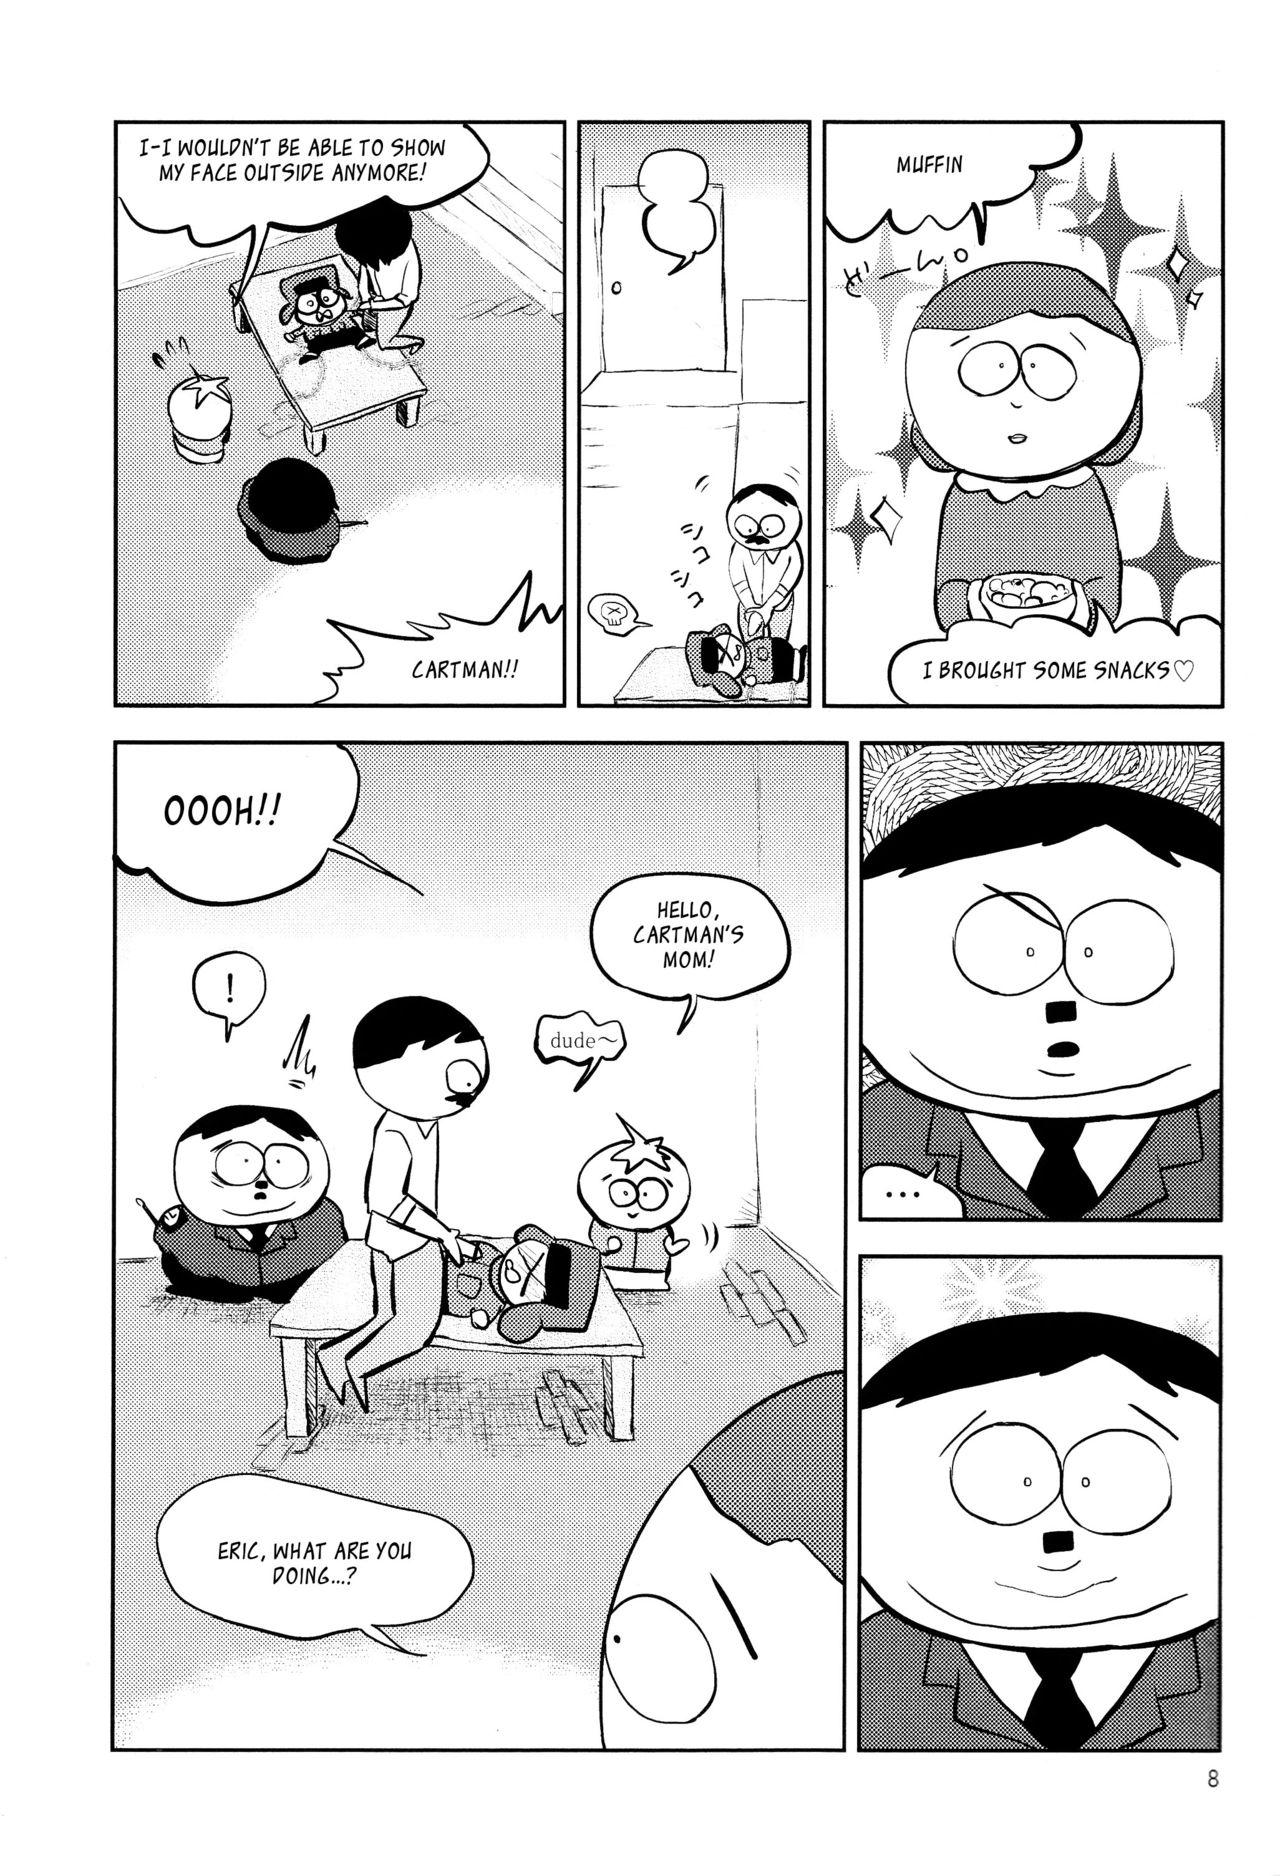 Twinkstudios Lovely Hitler's Counterattack - South park Grandmother - Page 8